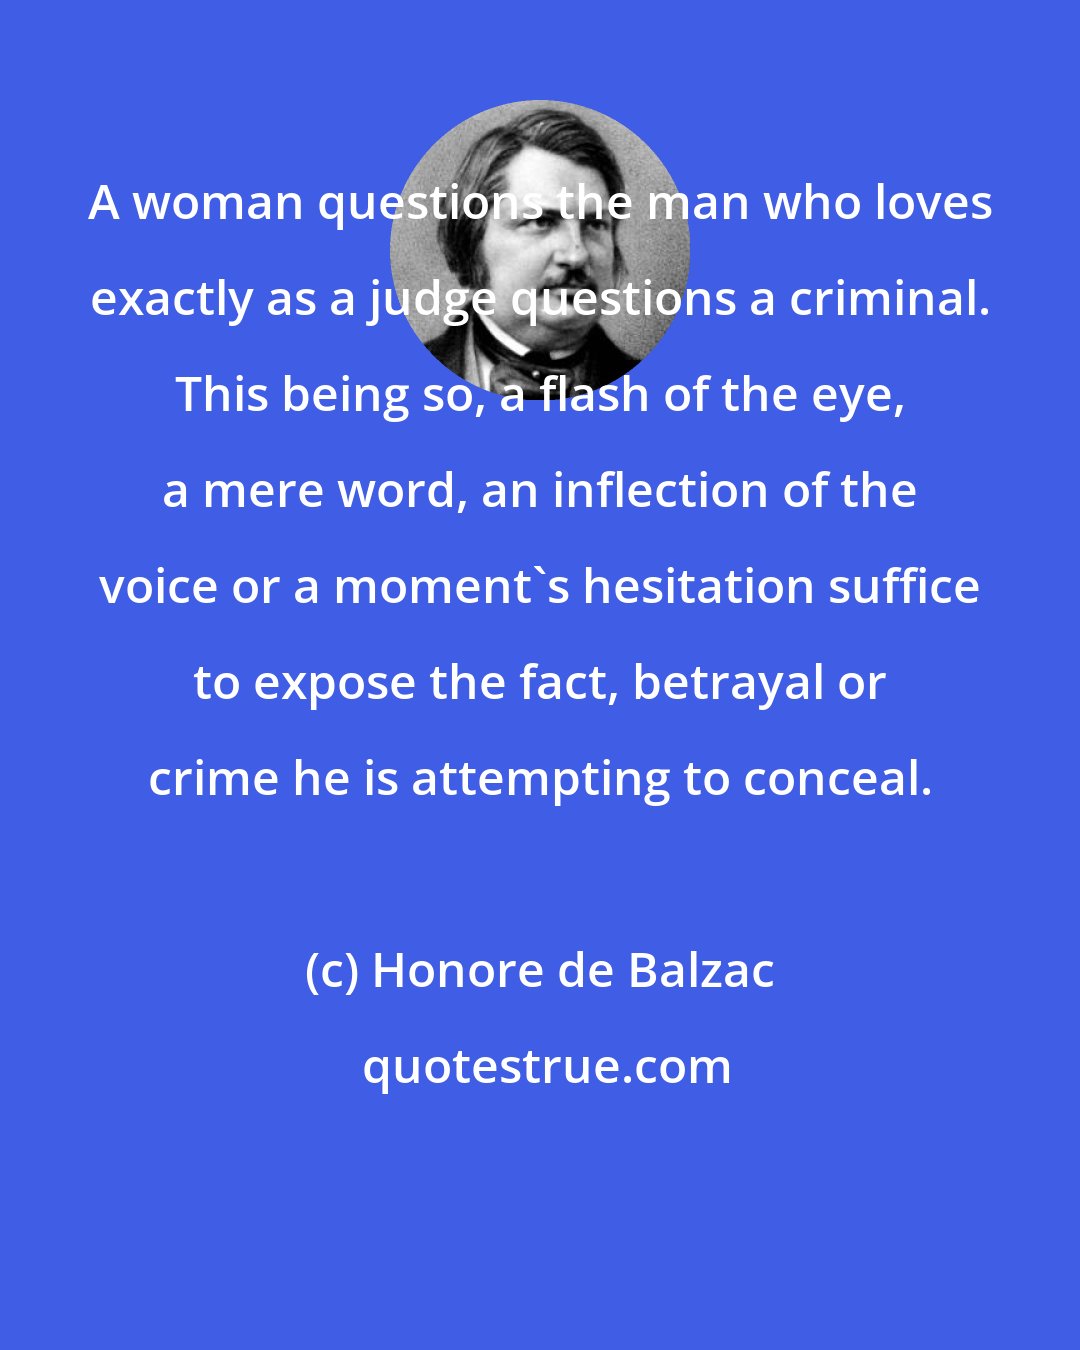 Honore de Balzac: A woman questions the man who loves exactly as a judge questions a criminal. This being so, a flash of the eye, a mere word, an inflection of the voice or a moment's hesitation suffice to expose the fact, betrayal or crime he is attempting to conceal.